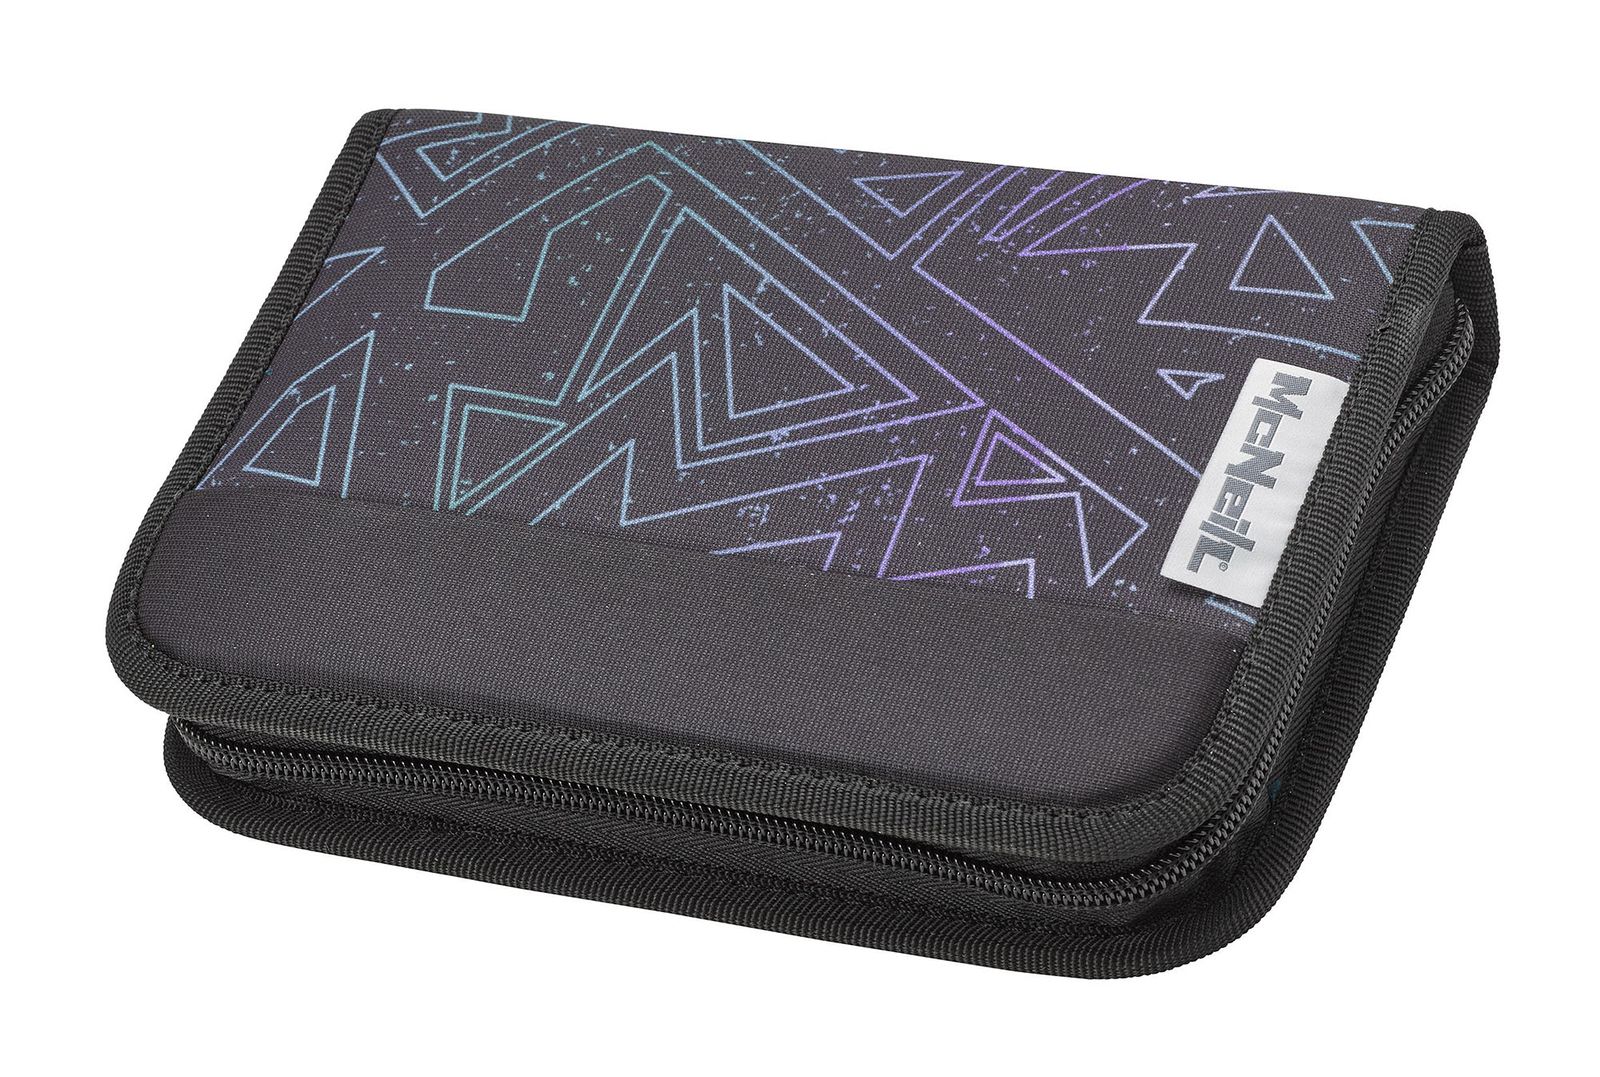 Tron with modeherz online purses case bags, pencil Buy & Pencil Case | Pens McNeill accessories |